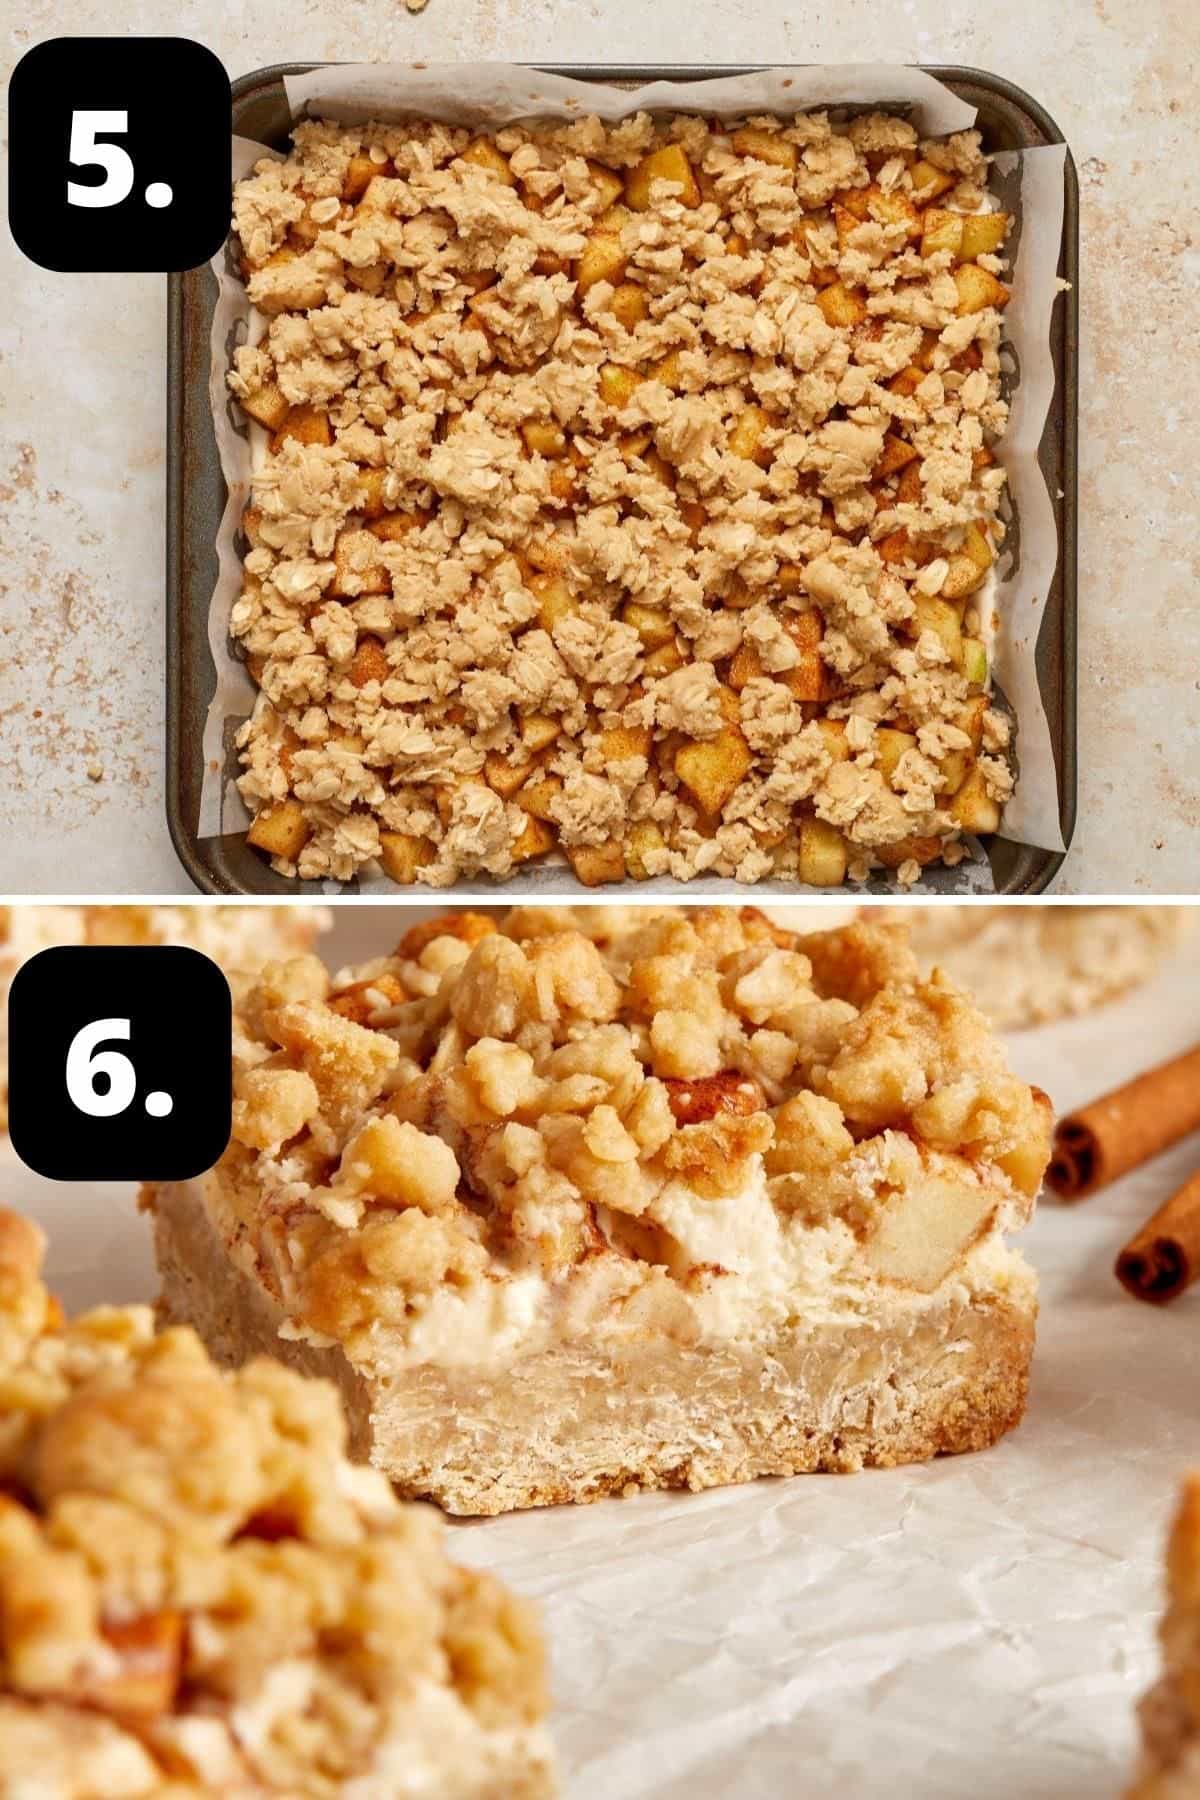 Steps 5-6 of preparing this recipe: the bars topped with the apple and crumble ready for the oven and the cooked cut bars.